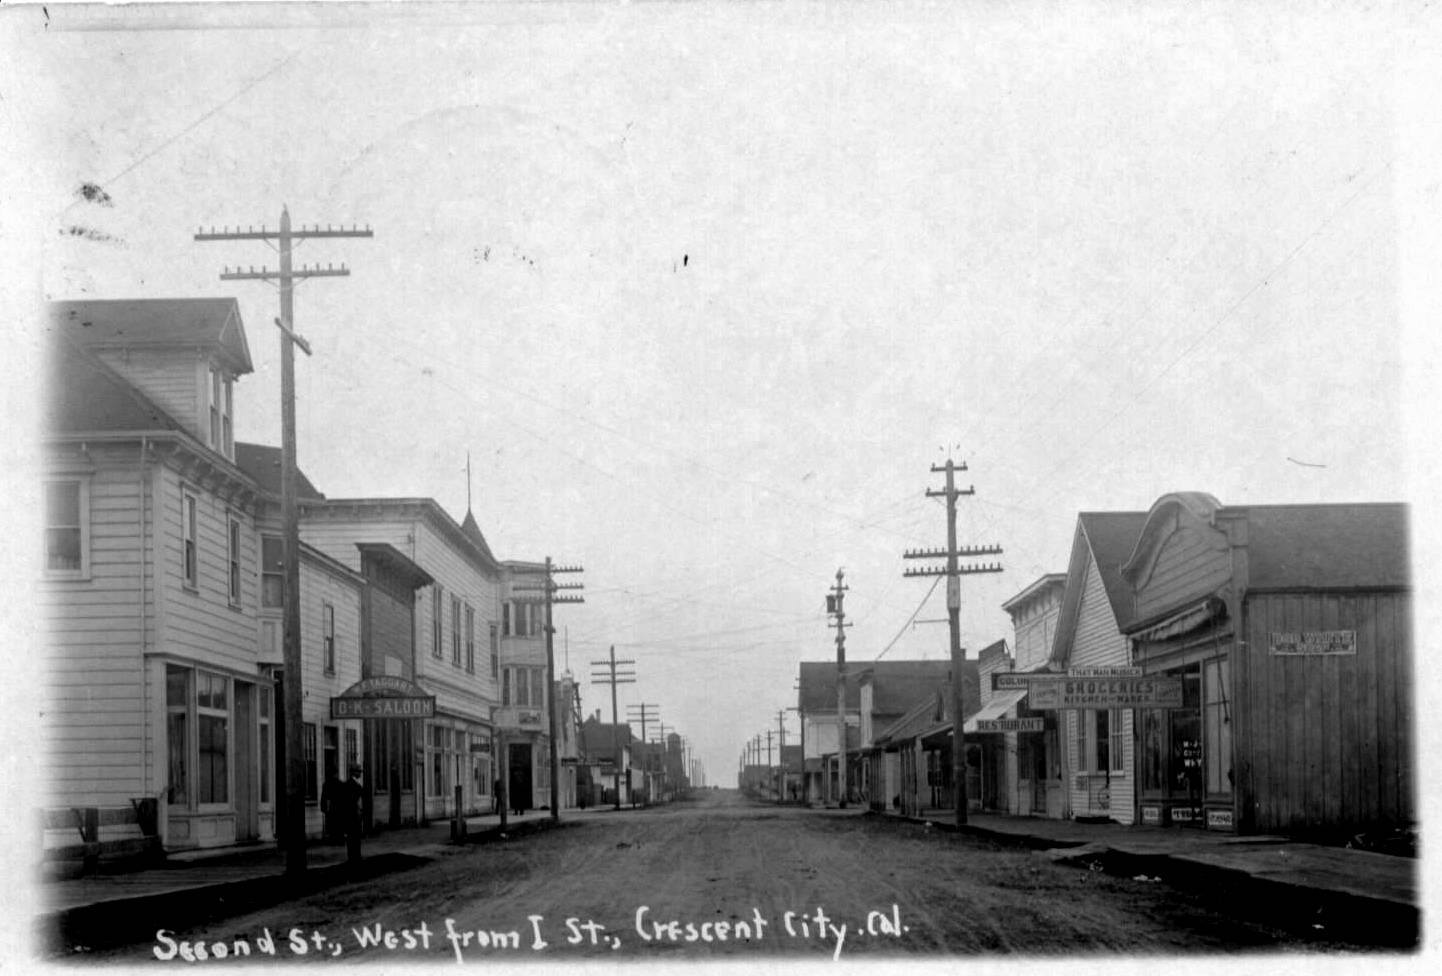 Crescent City early 1900s.jpg